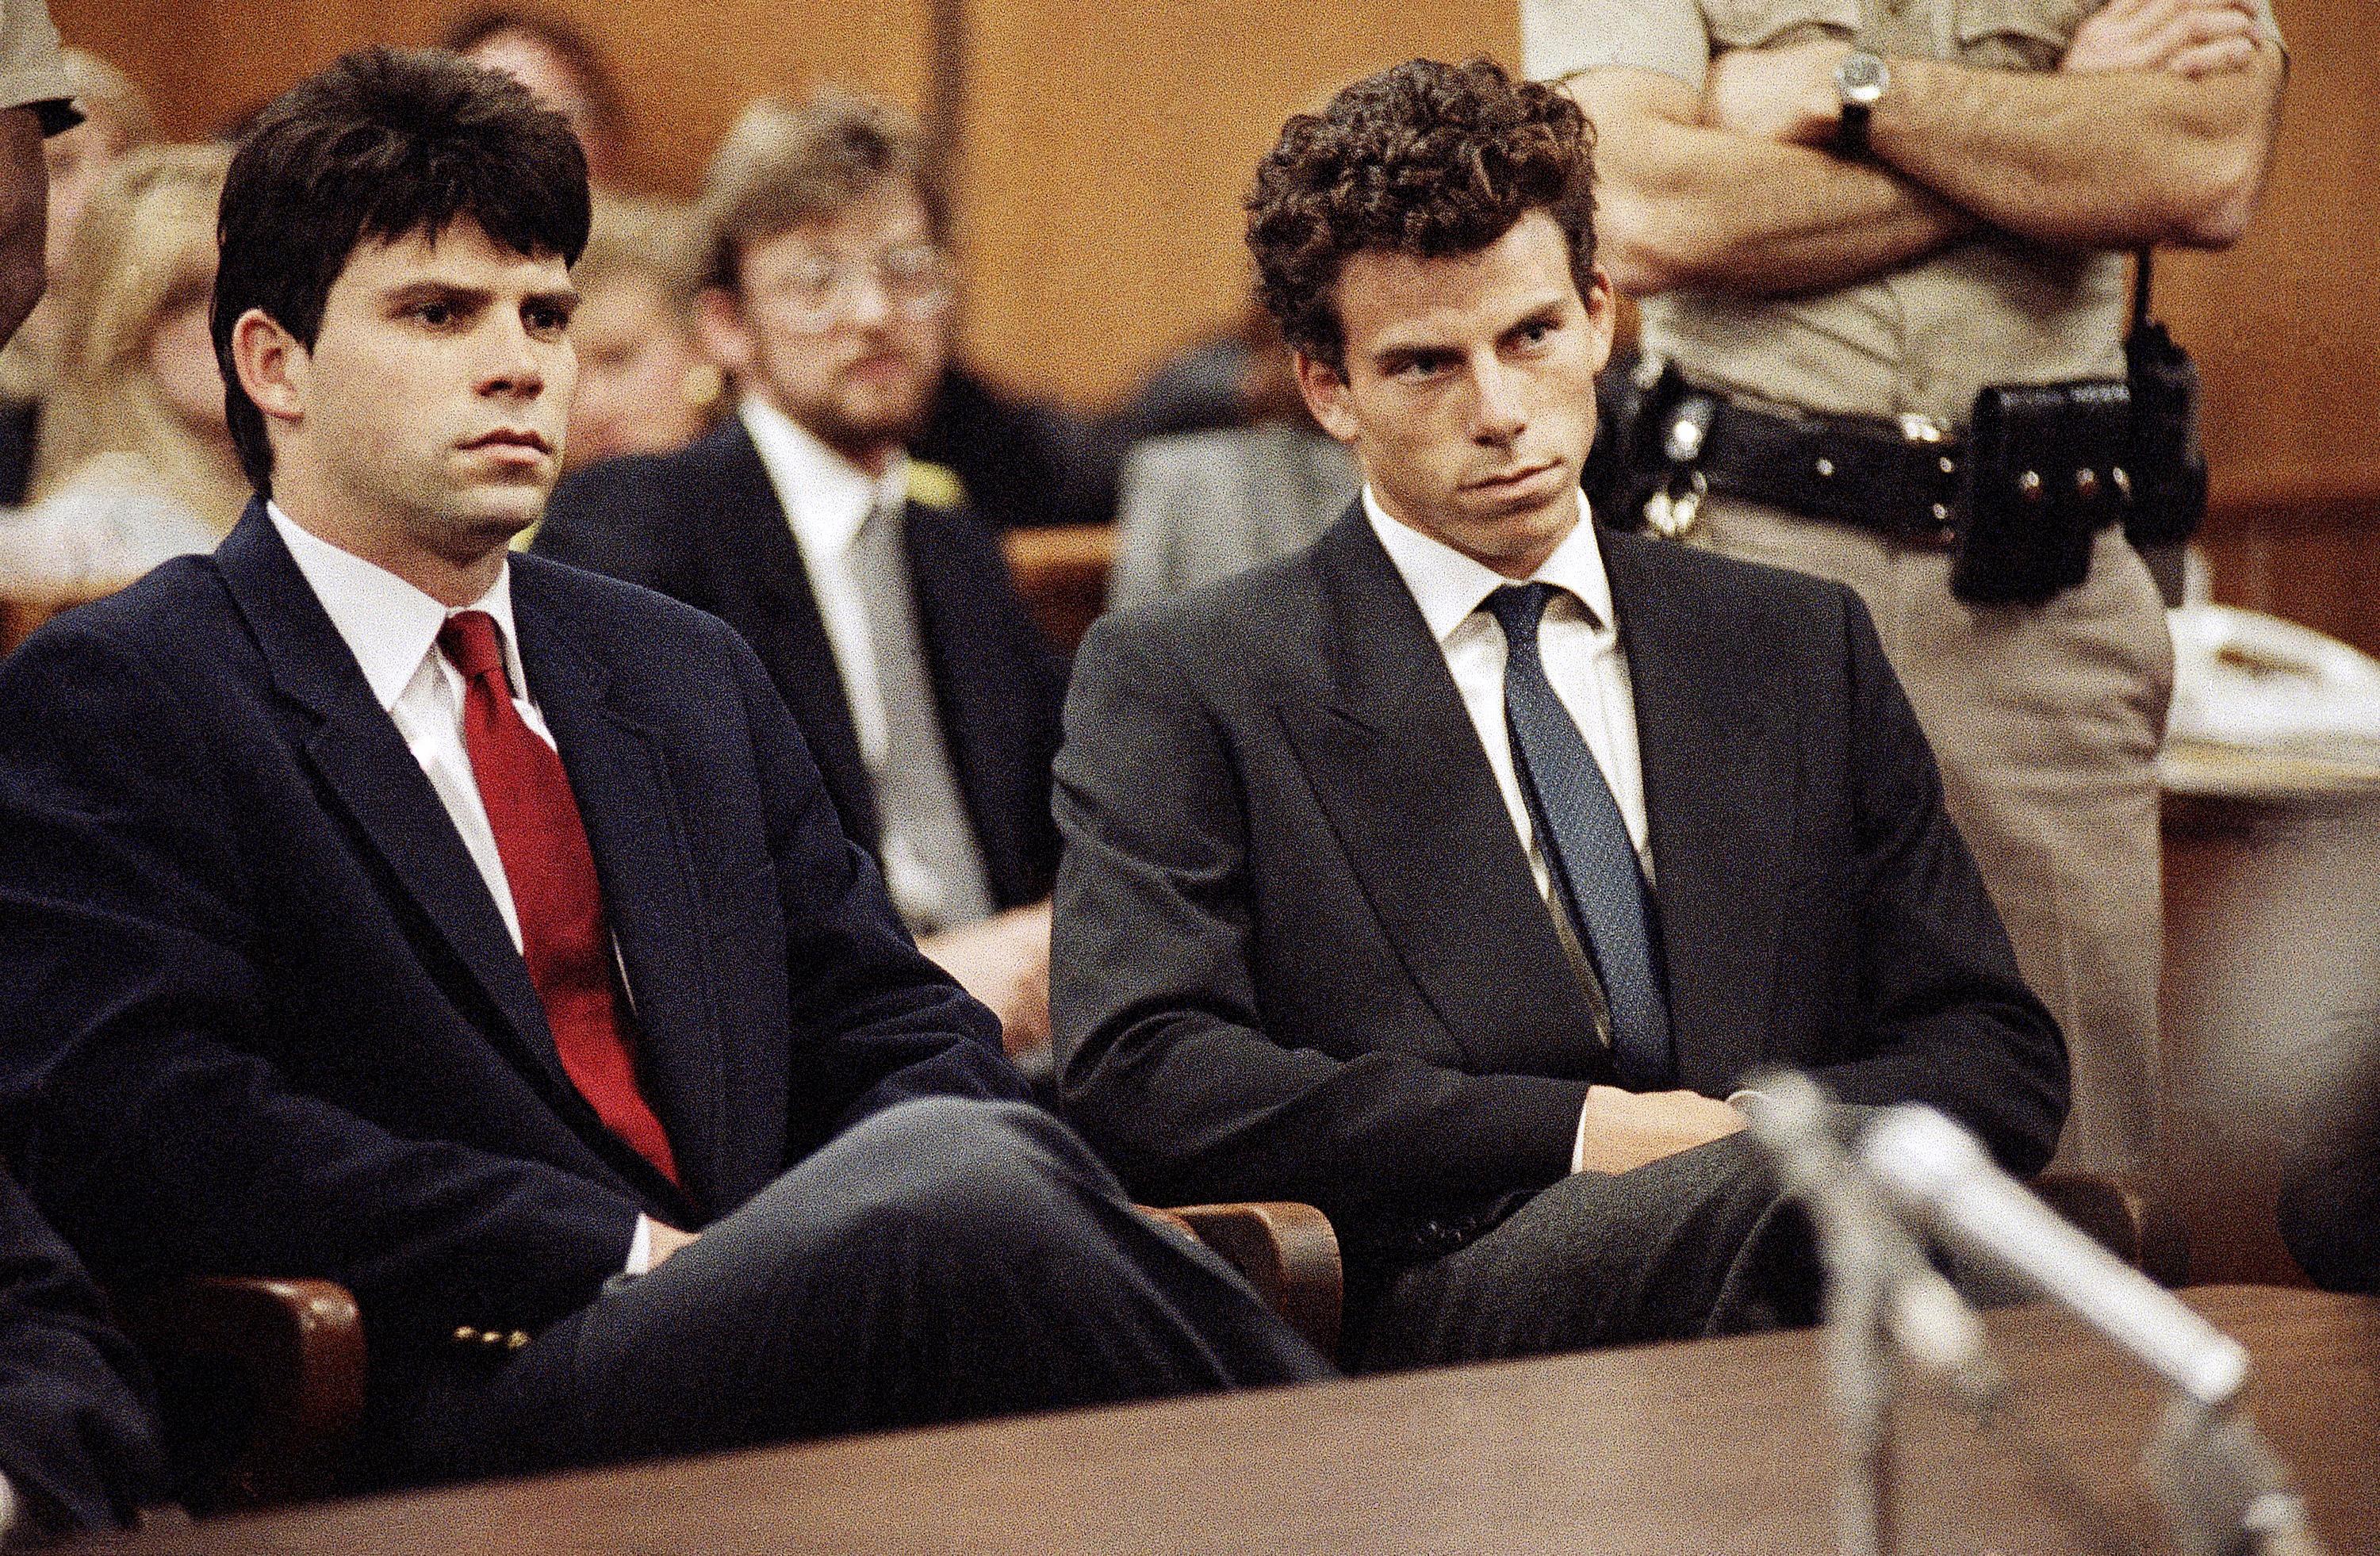 The Menendez Brothers Life After 31 Years in Prison